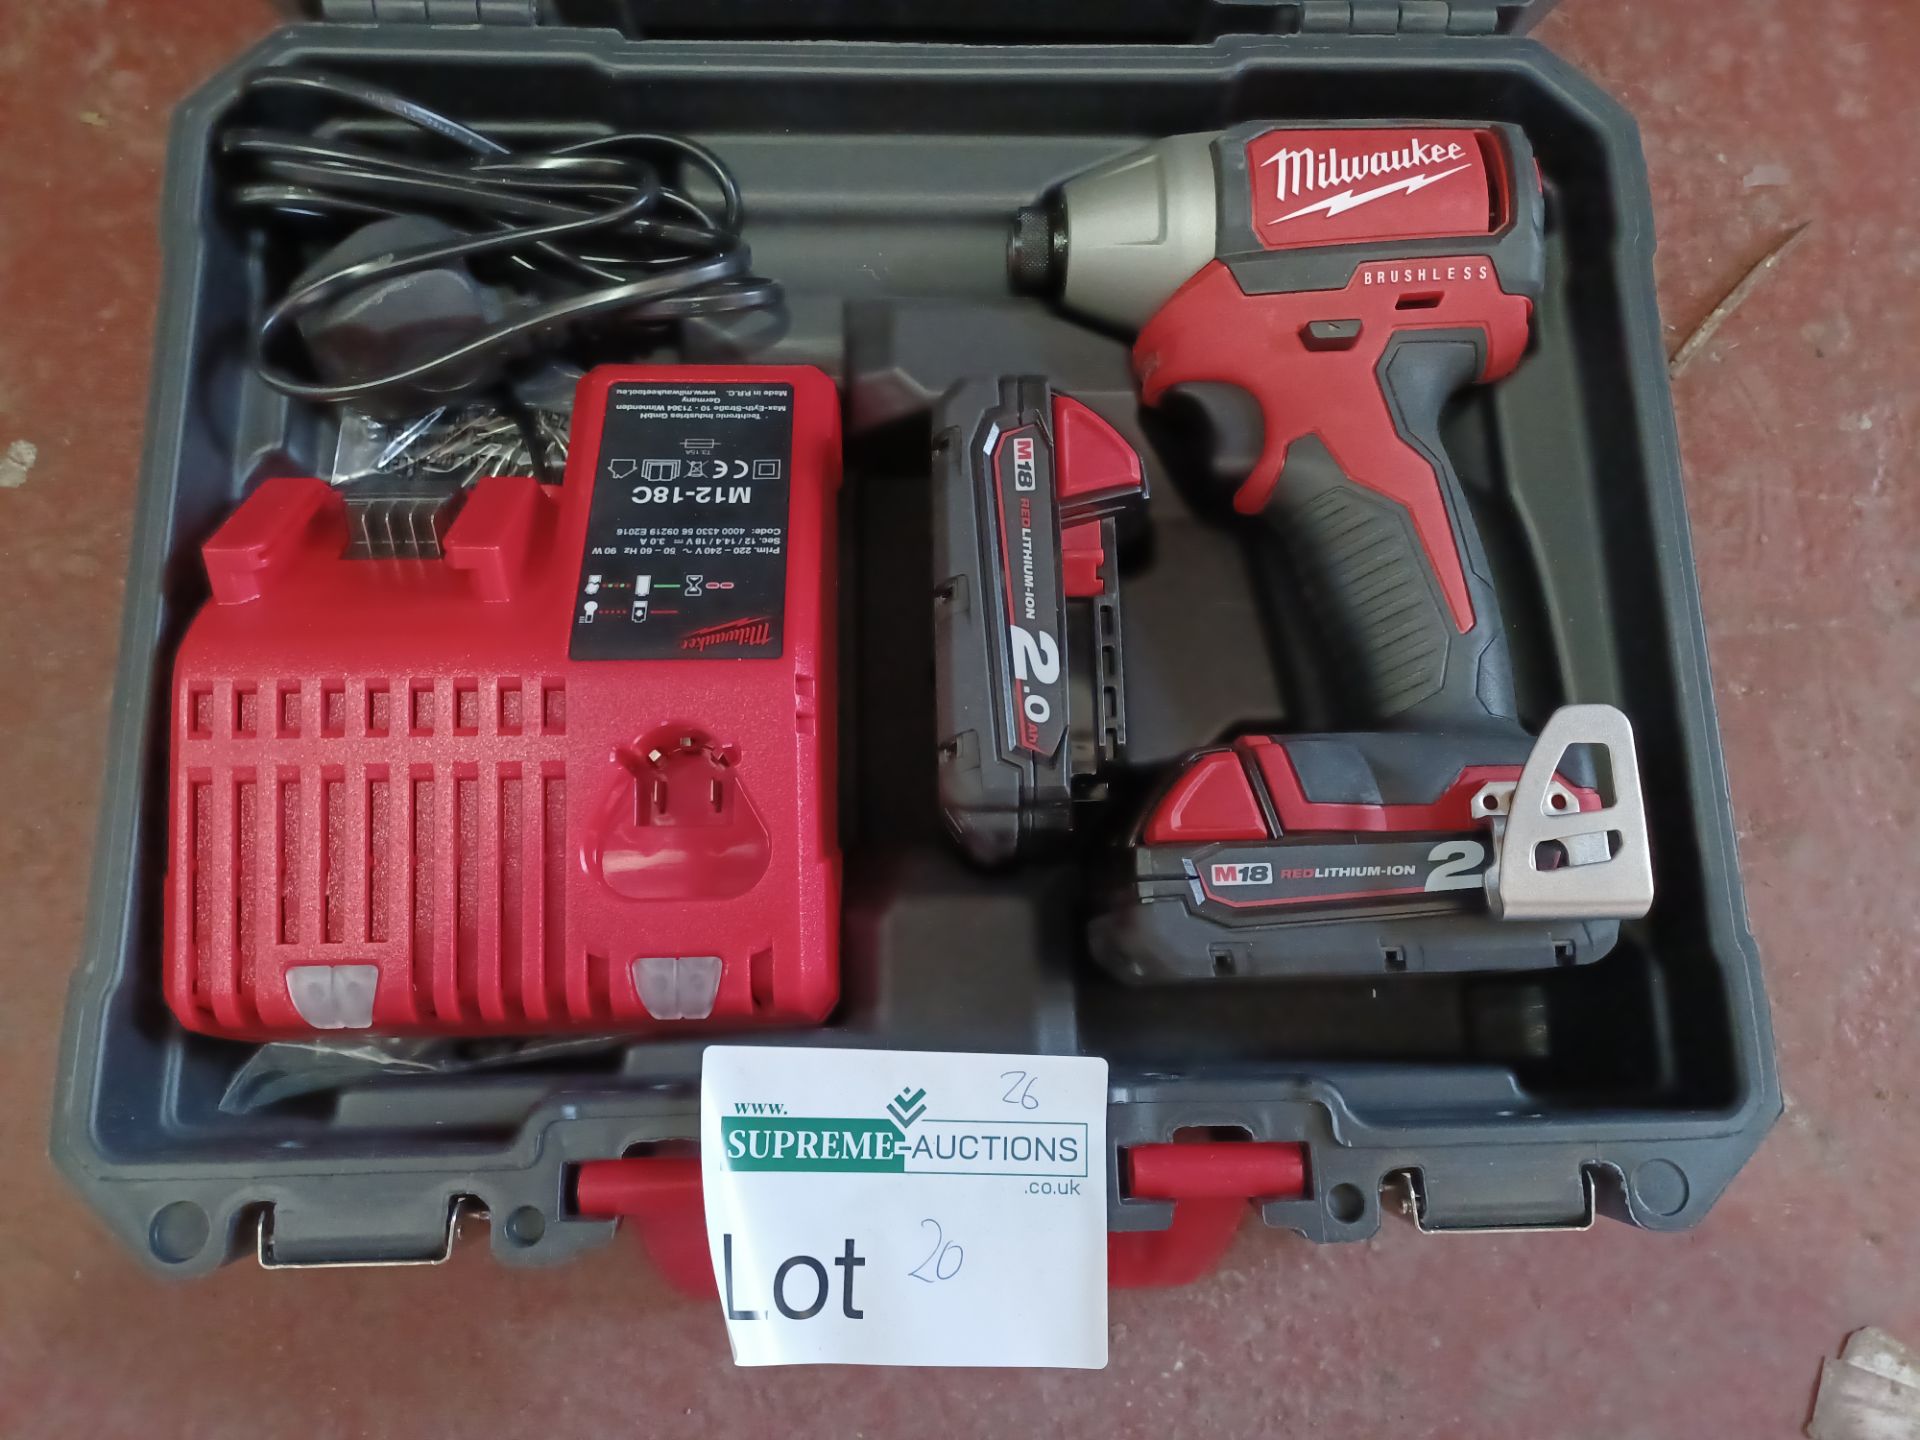 MILWAUKEE M18BLID2 M18 BLID-202C Brushless Impact Driver 18 Volt WITH 2 BATTERIES CHARGER AND